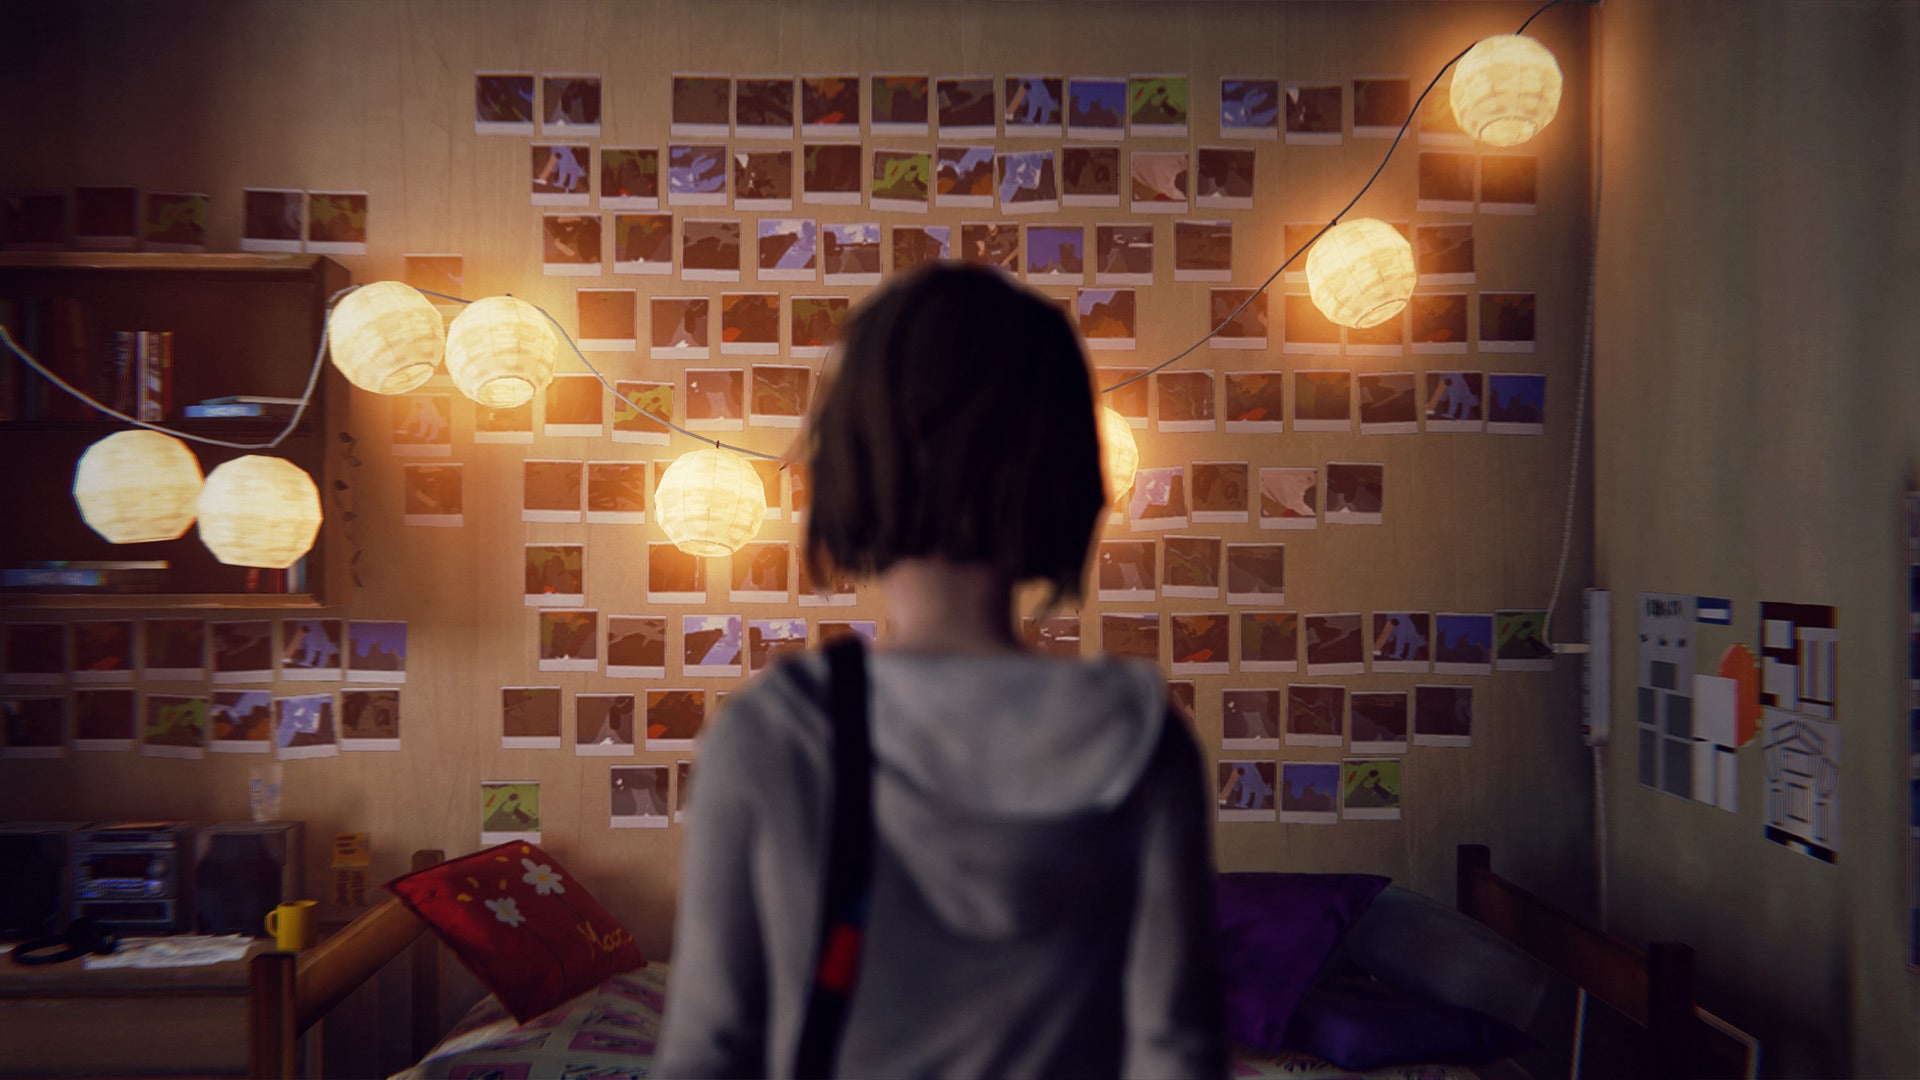 Life Is Strange Ep 1 Review Finding The Strange In Everyday Life 